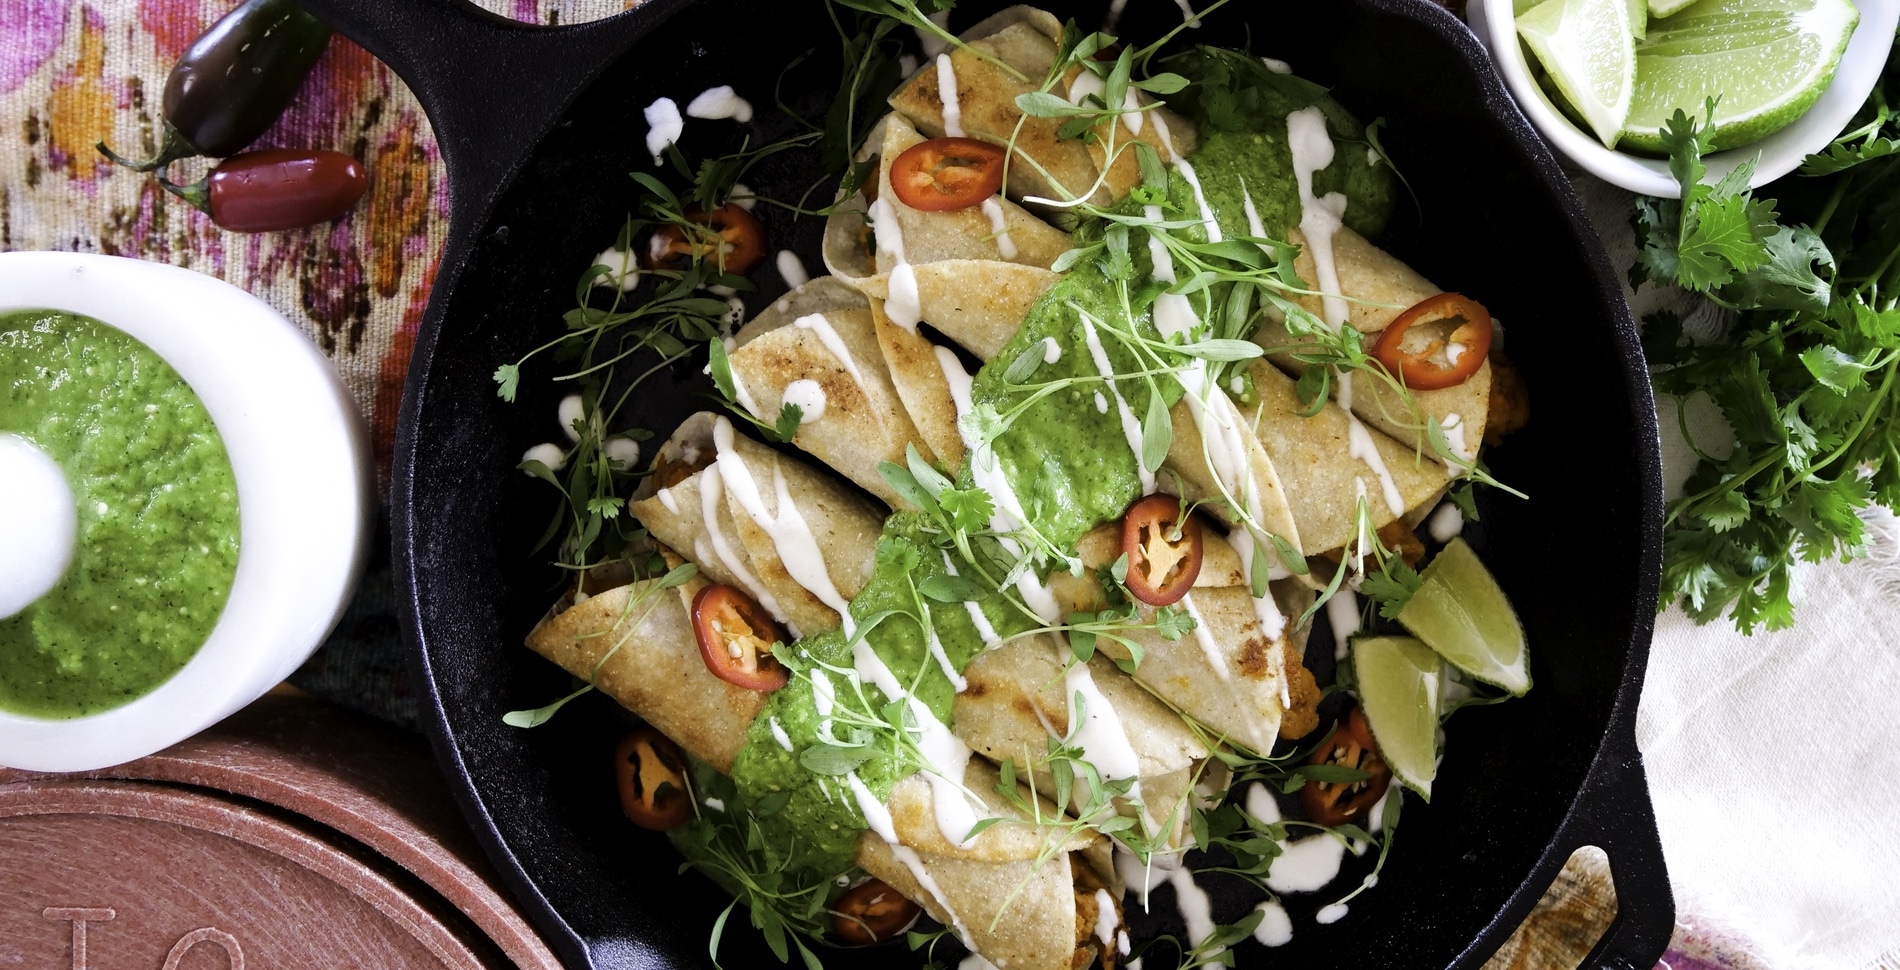 Celebrate Cinco de Mayo With These 11 Meatless Mexican Recipes